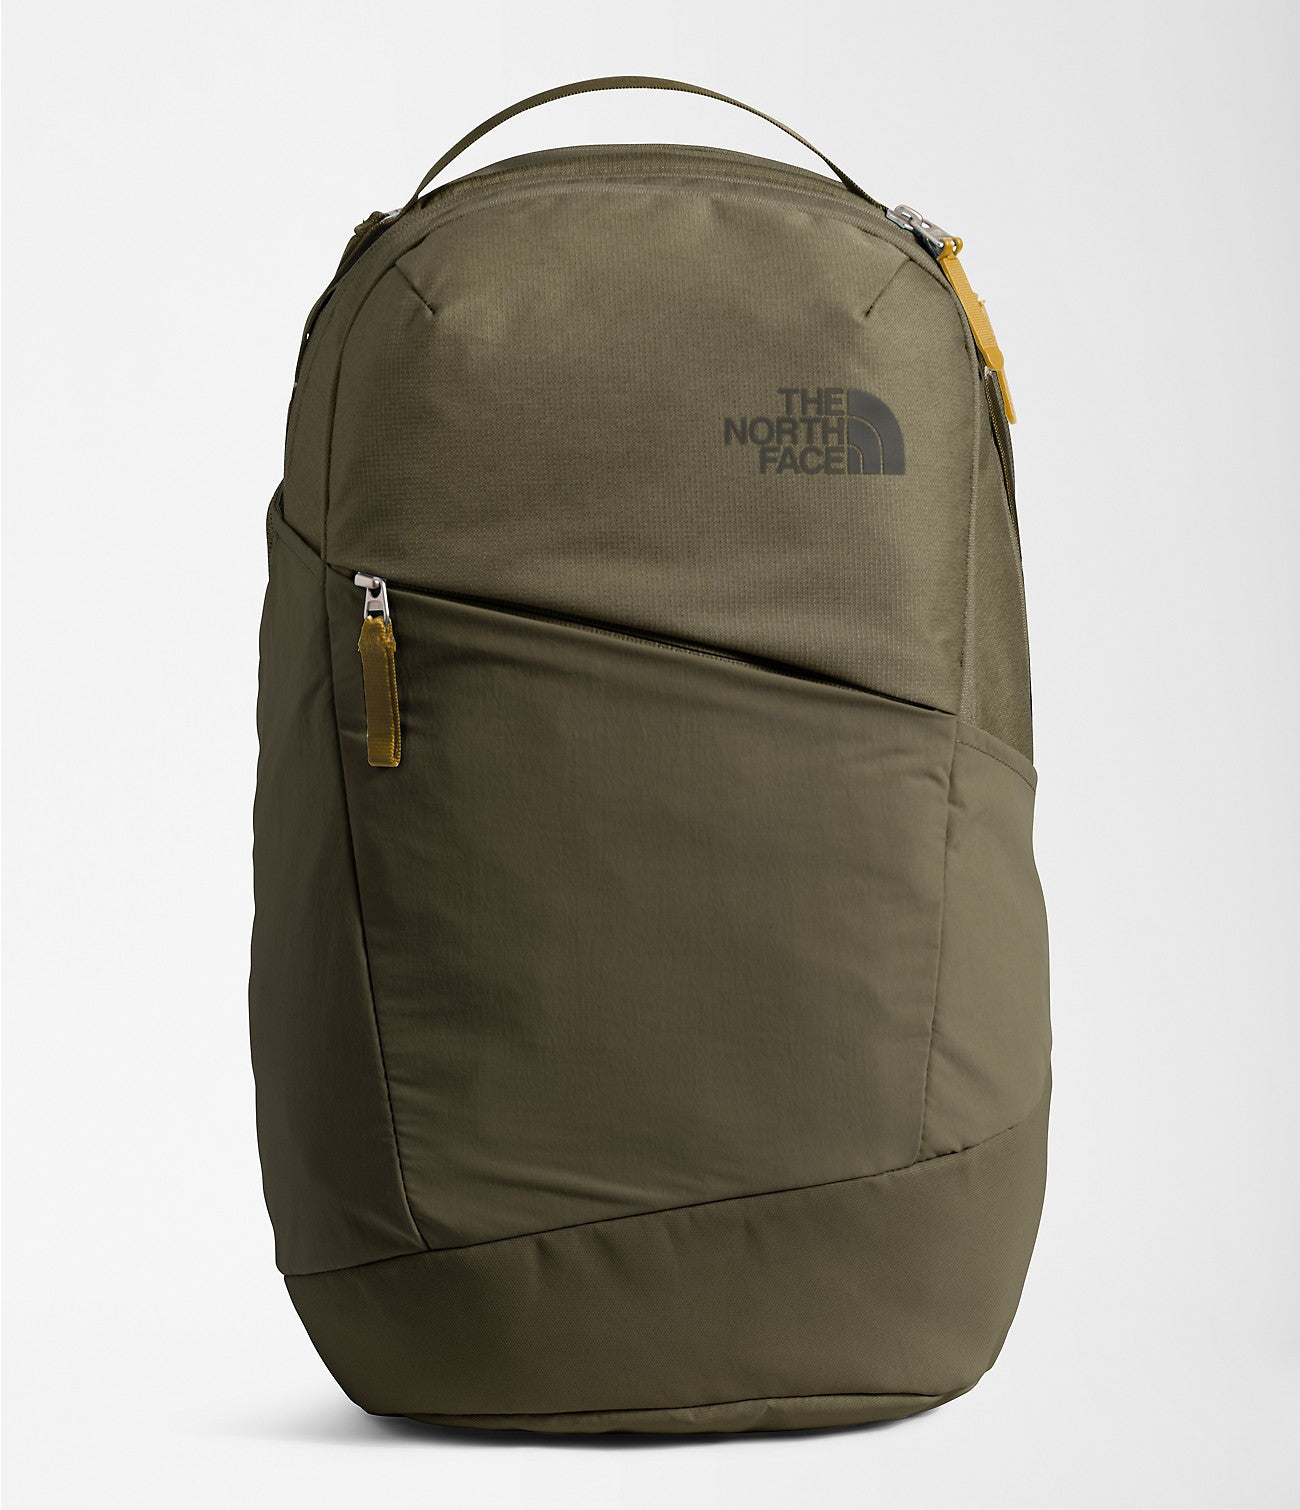 The North Face Women's Isabella 3.0 Daypack – OutdoorsInc.com